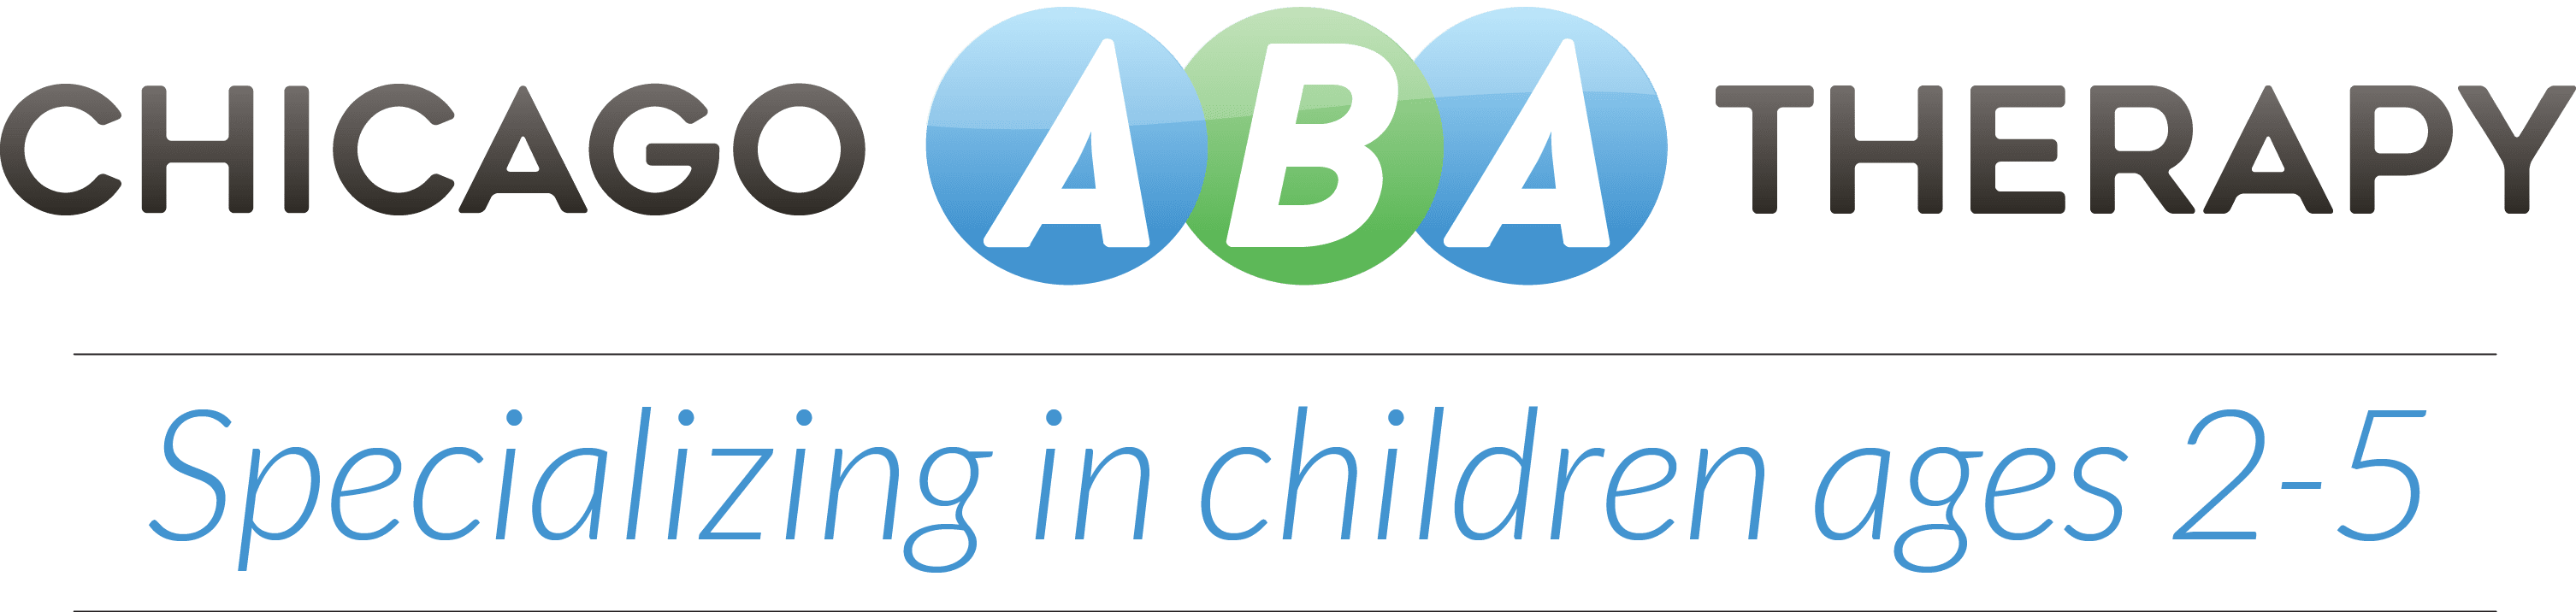 Chicago ABA Therapy